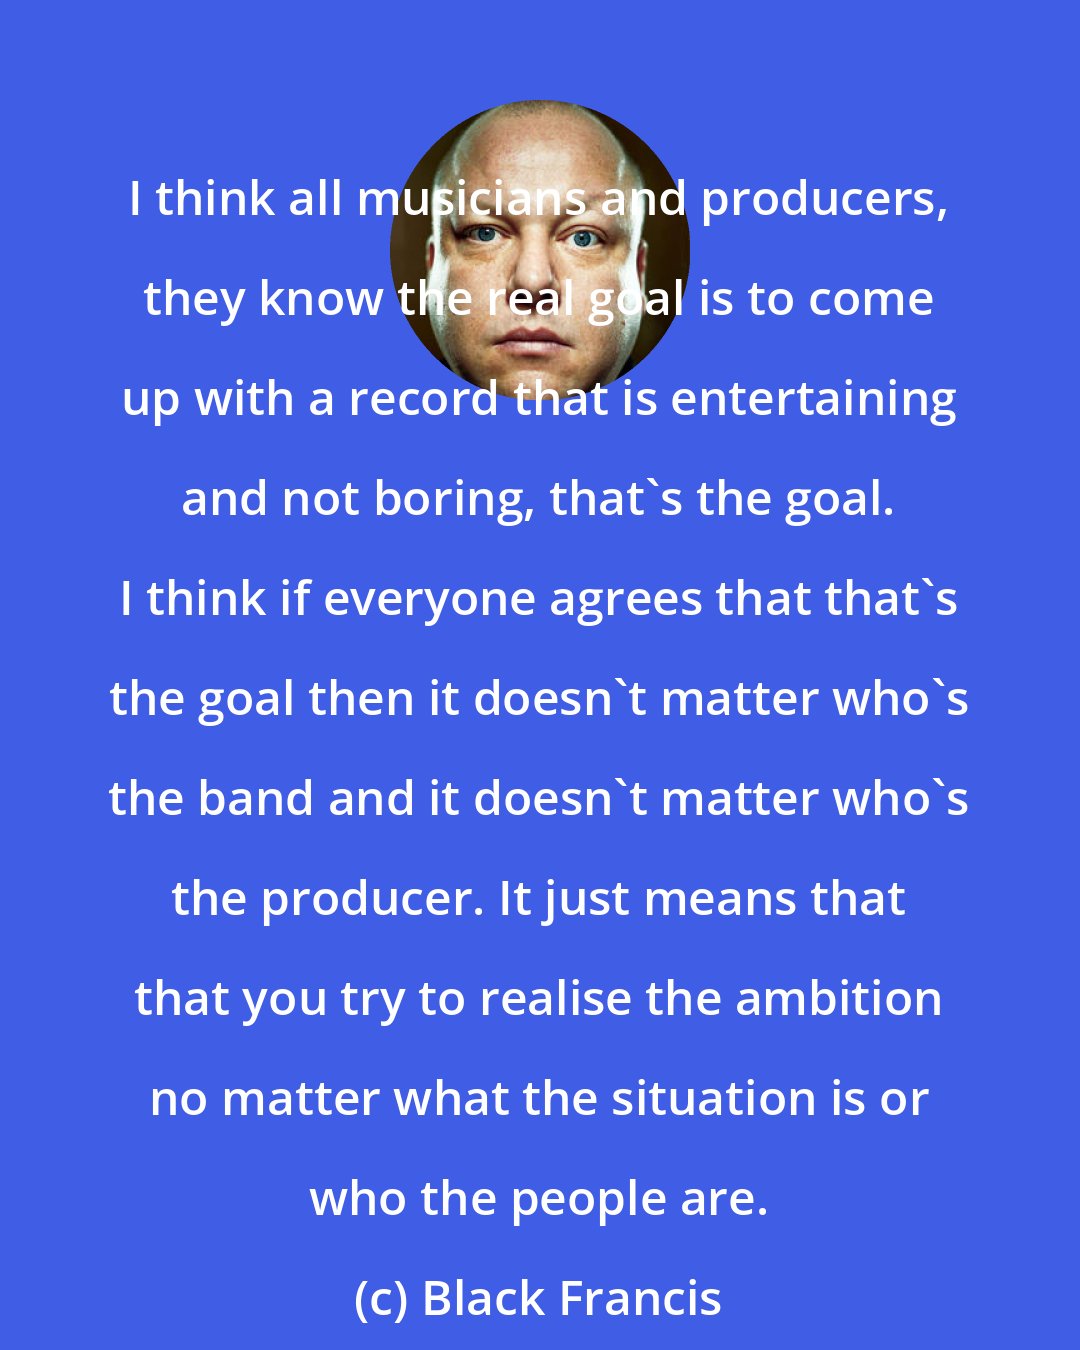 Black Francis: I think all musicians and producers, they know the real goal is to come up with a record that is entertaining and not boring, that's the goal. I think if everyone agrees that that's the goal then it doesn't matter who's the band and it doesn't matter who's the producer. It just means that that you try to realise the ambition no matter what the situation is or who the people are.